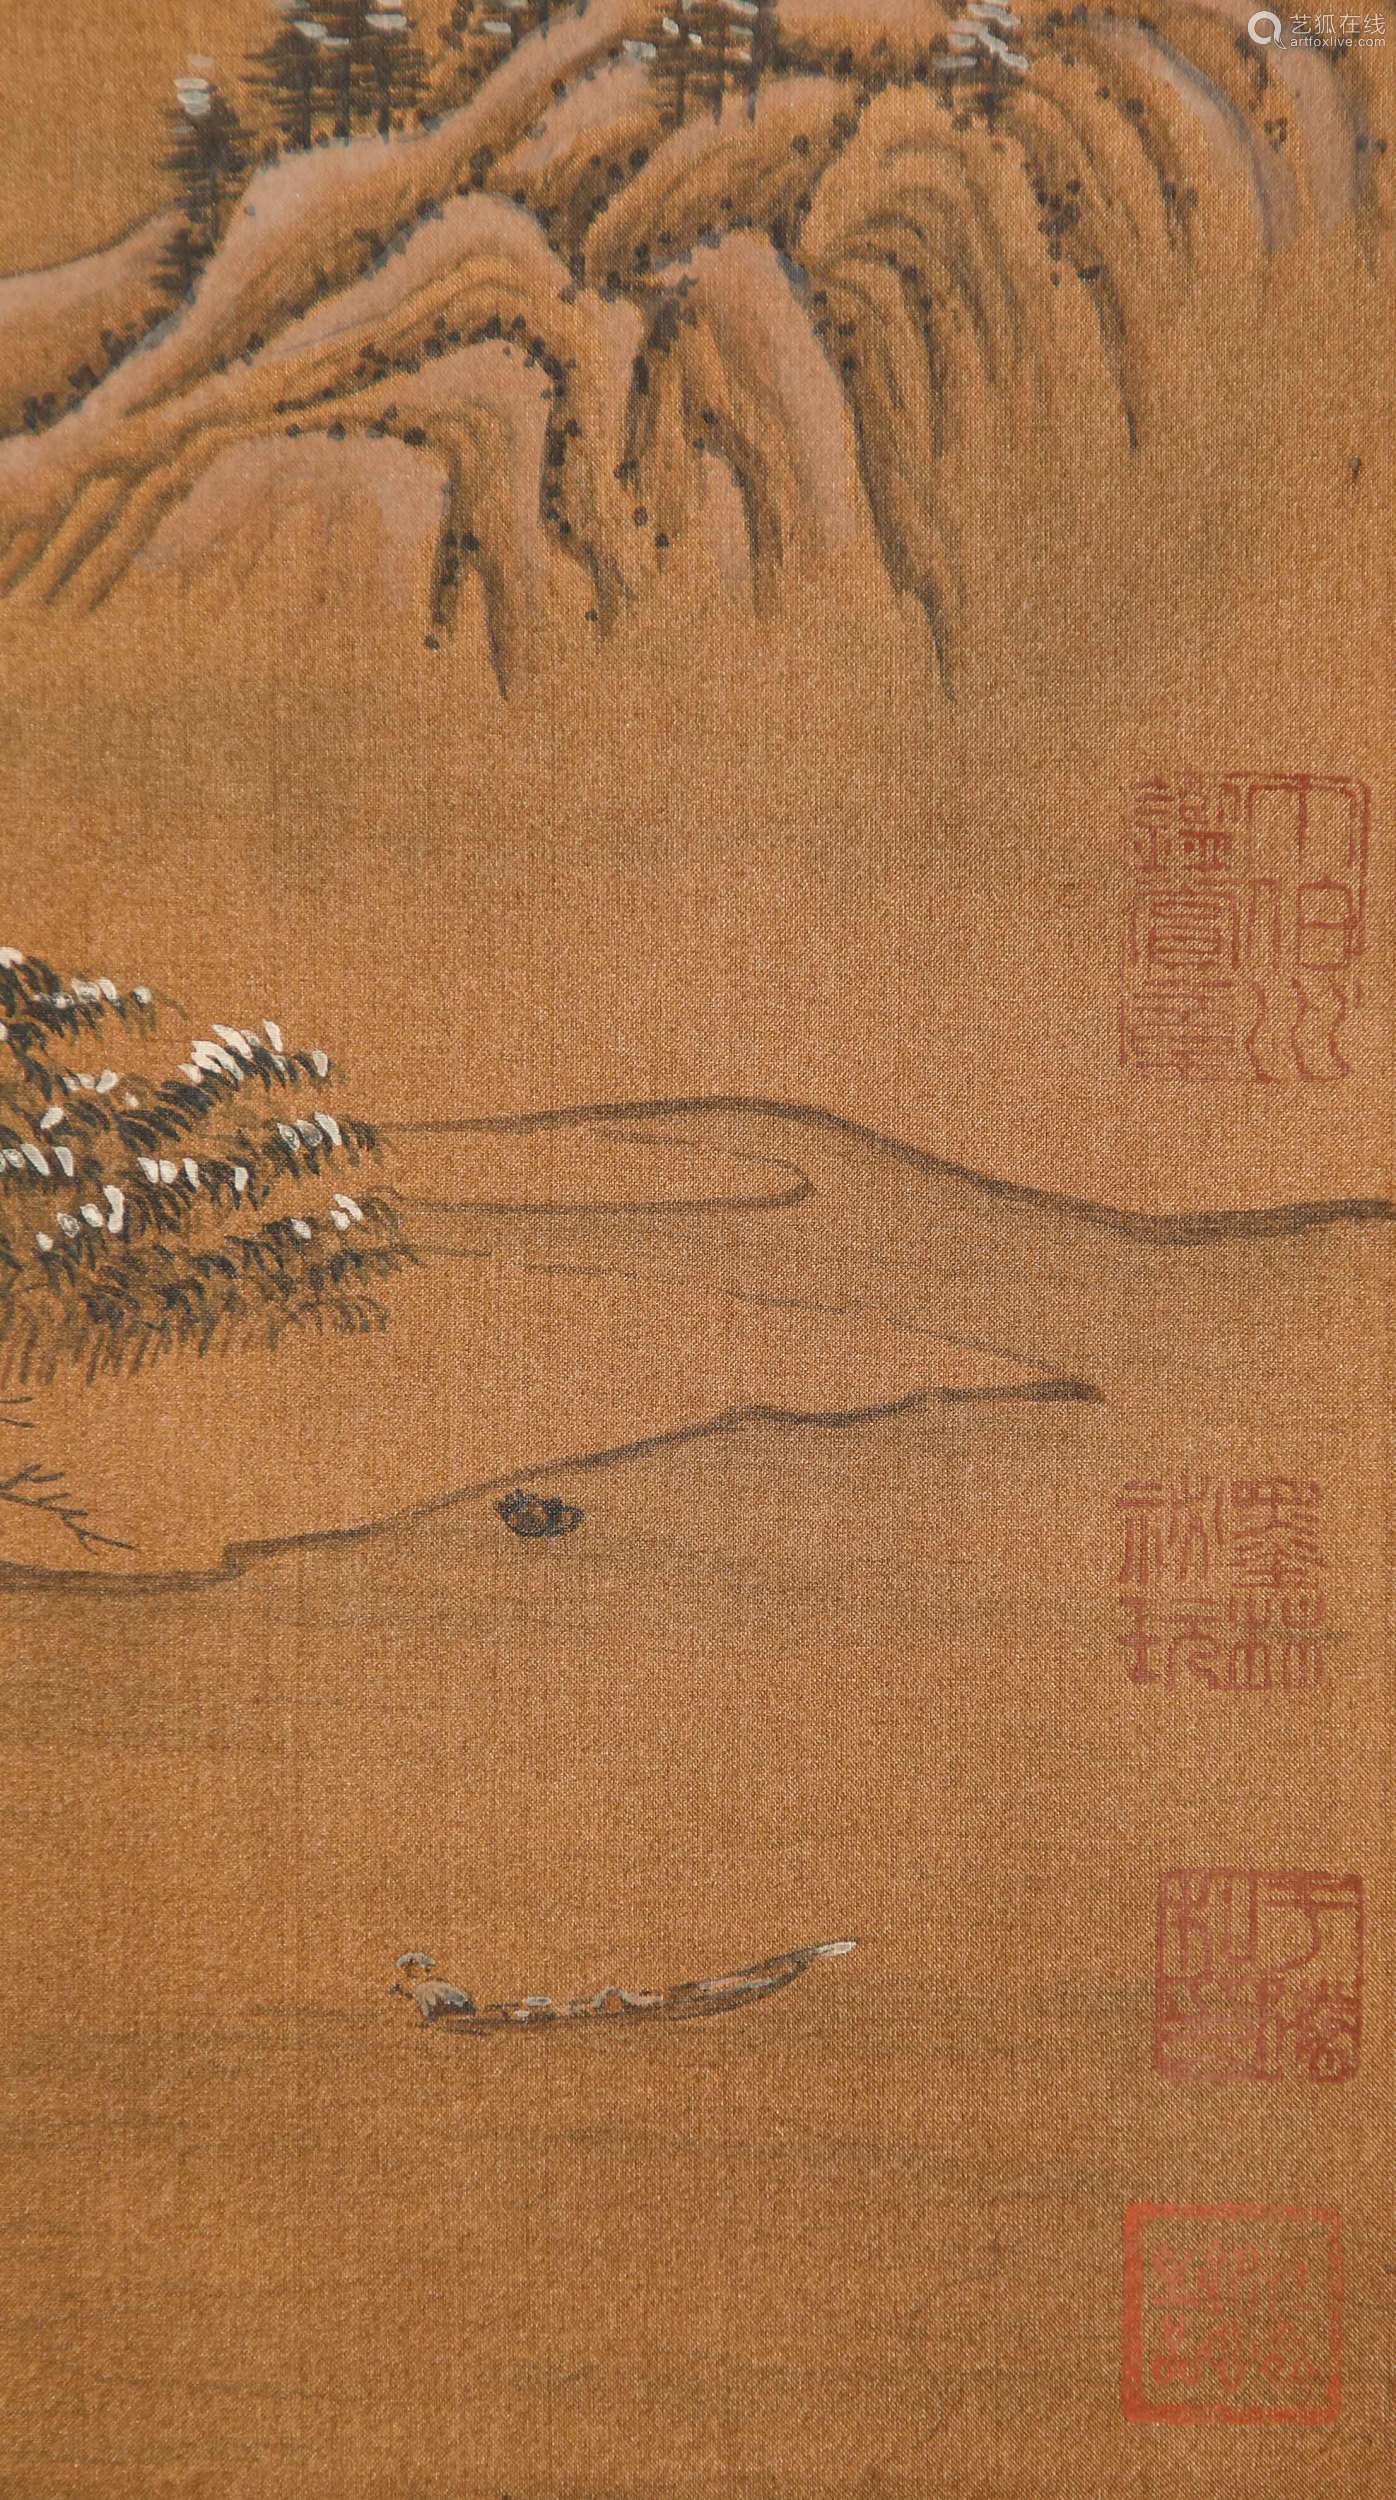 Chinese ink painting, 
Yi Ming's Landscape Paintings in Song...